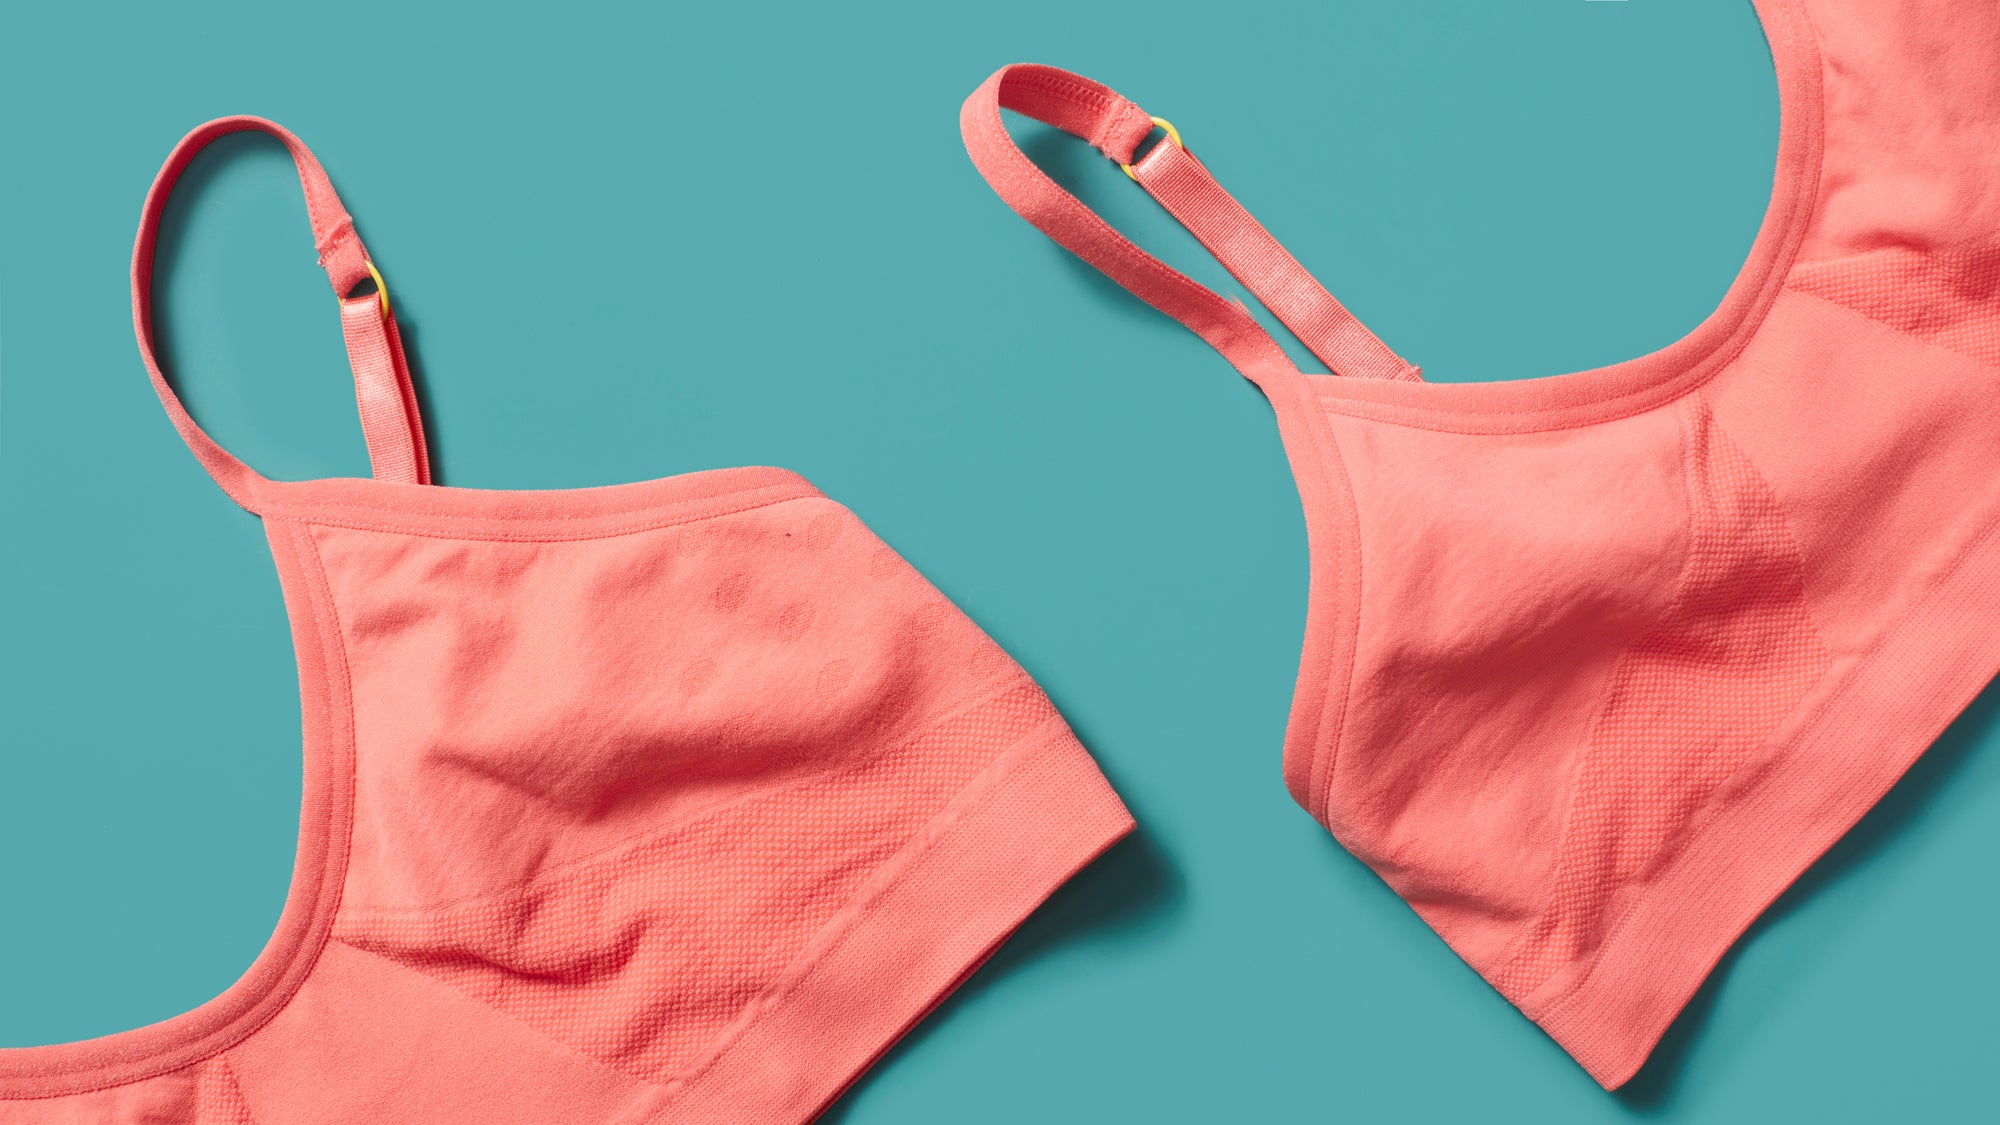 Does Seamless Underwear Help Sensory Issues?